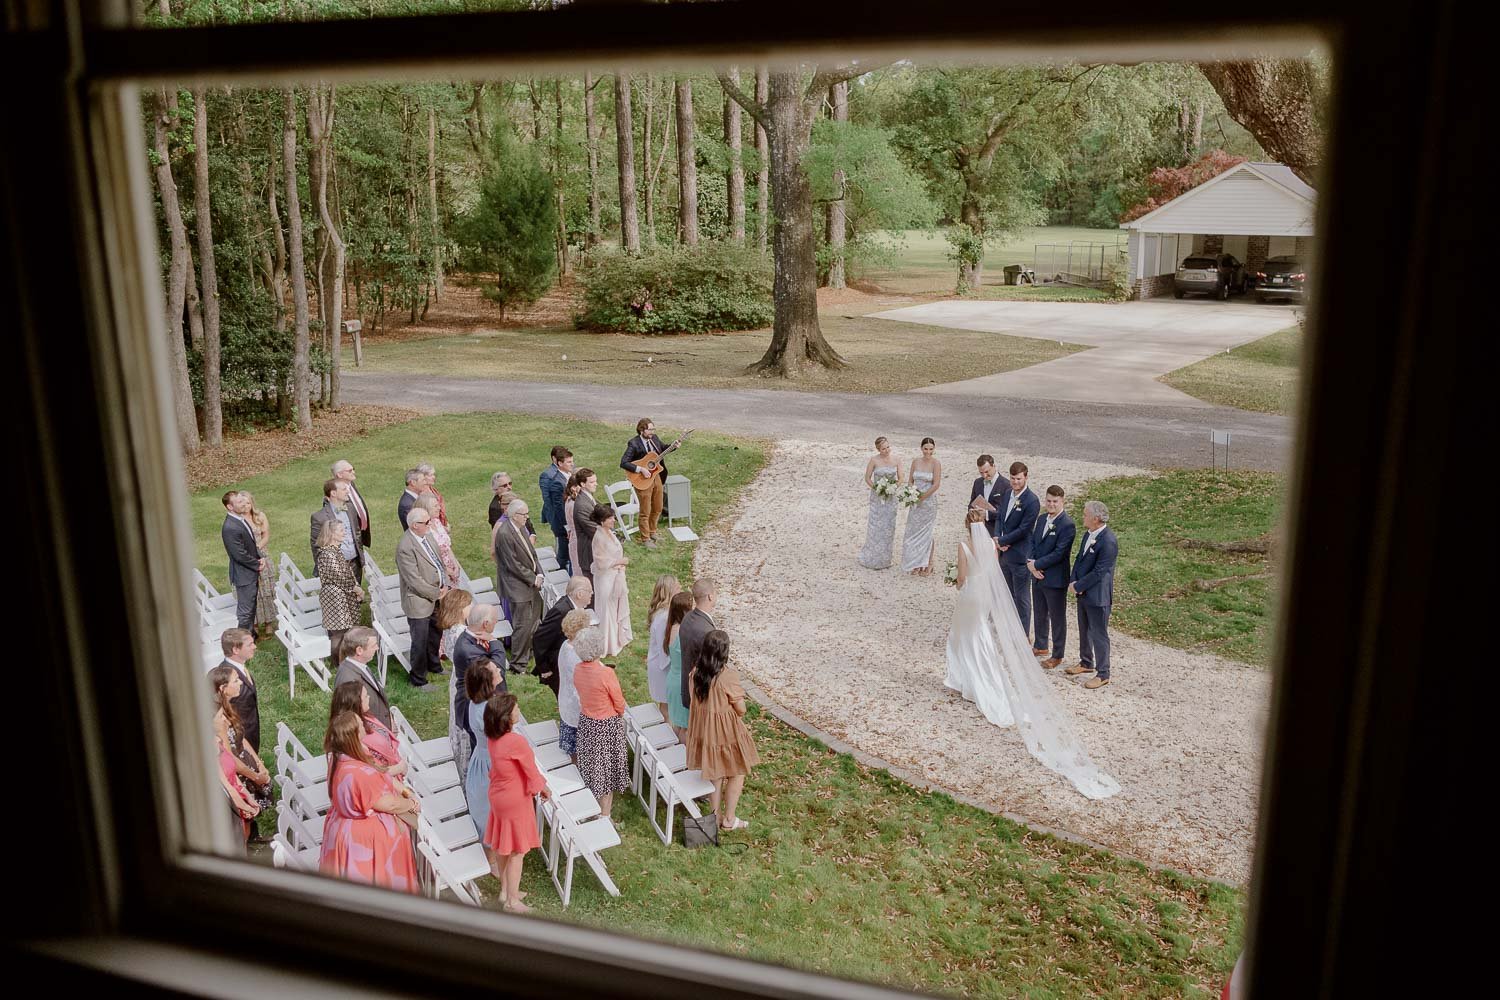 Home wedding photographed through window as bride enters ceremony in Georgetown South Carolina Wedding photojournalist Philip Thomas Photography L1008593